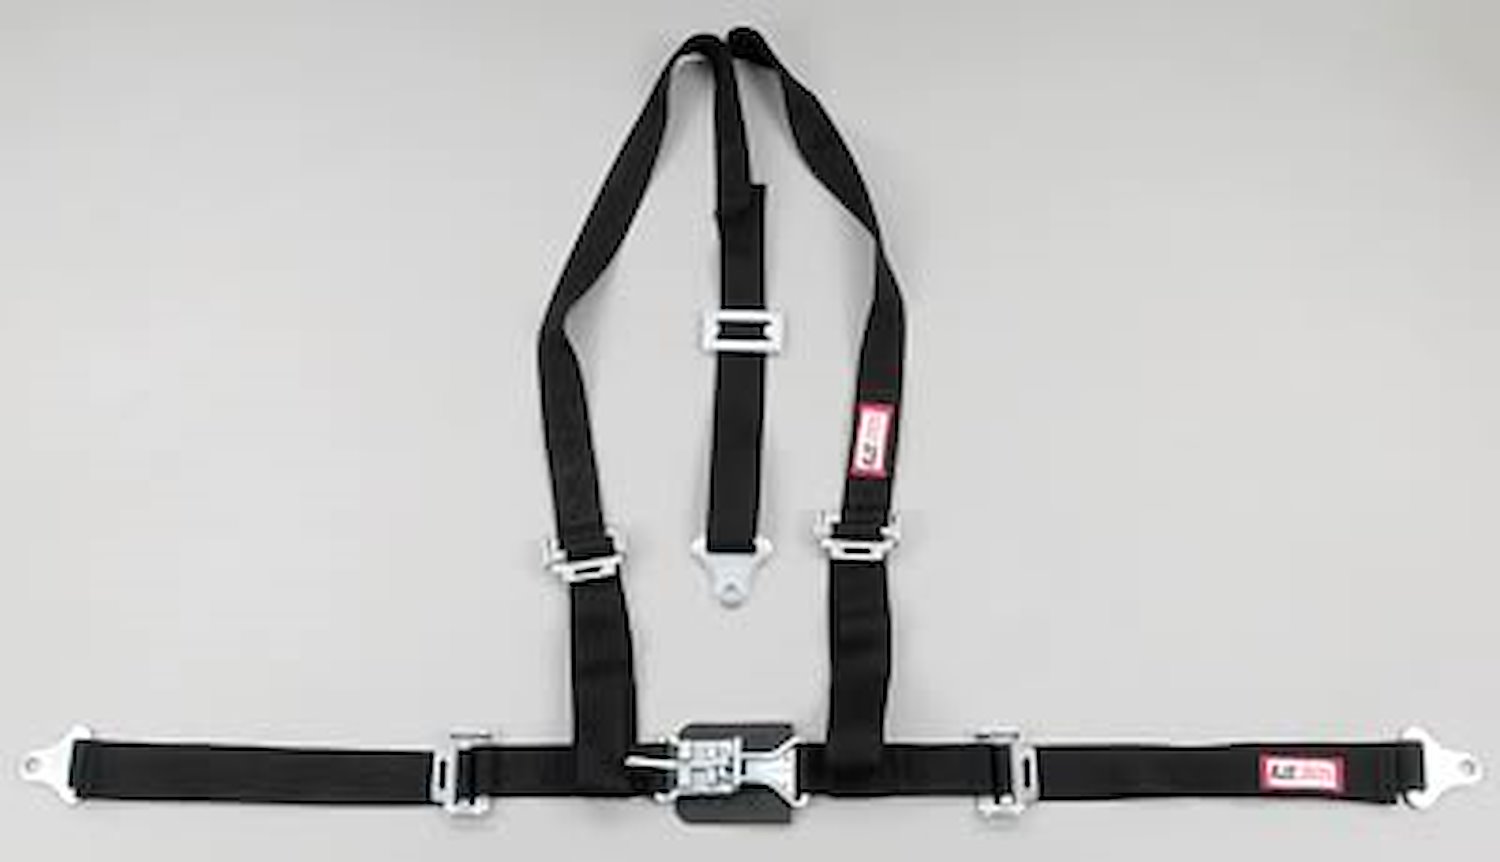 NON-SFI L&L HARNESS 3 PULL DOWN Lap Belt w/adjuster SNAP 2 S.H. Individual FLOOR Mount w/STERNUM STRAP WRAP/SNAP HOT PINK